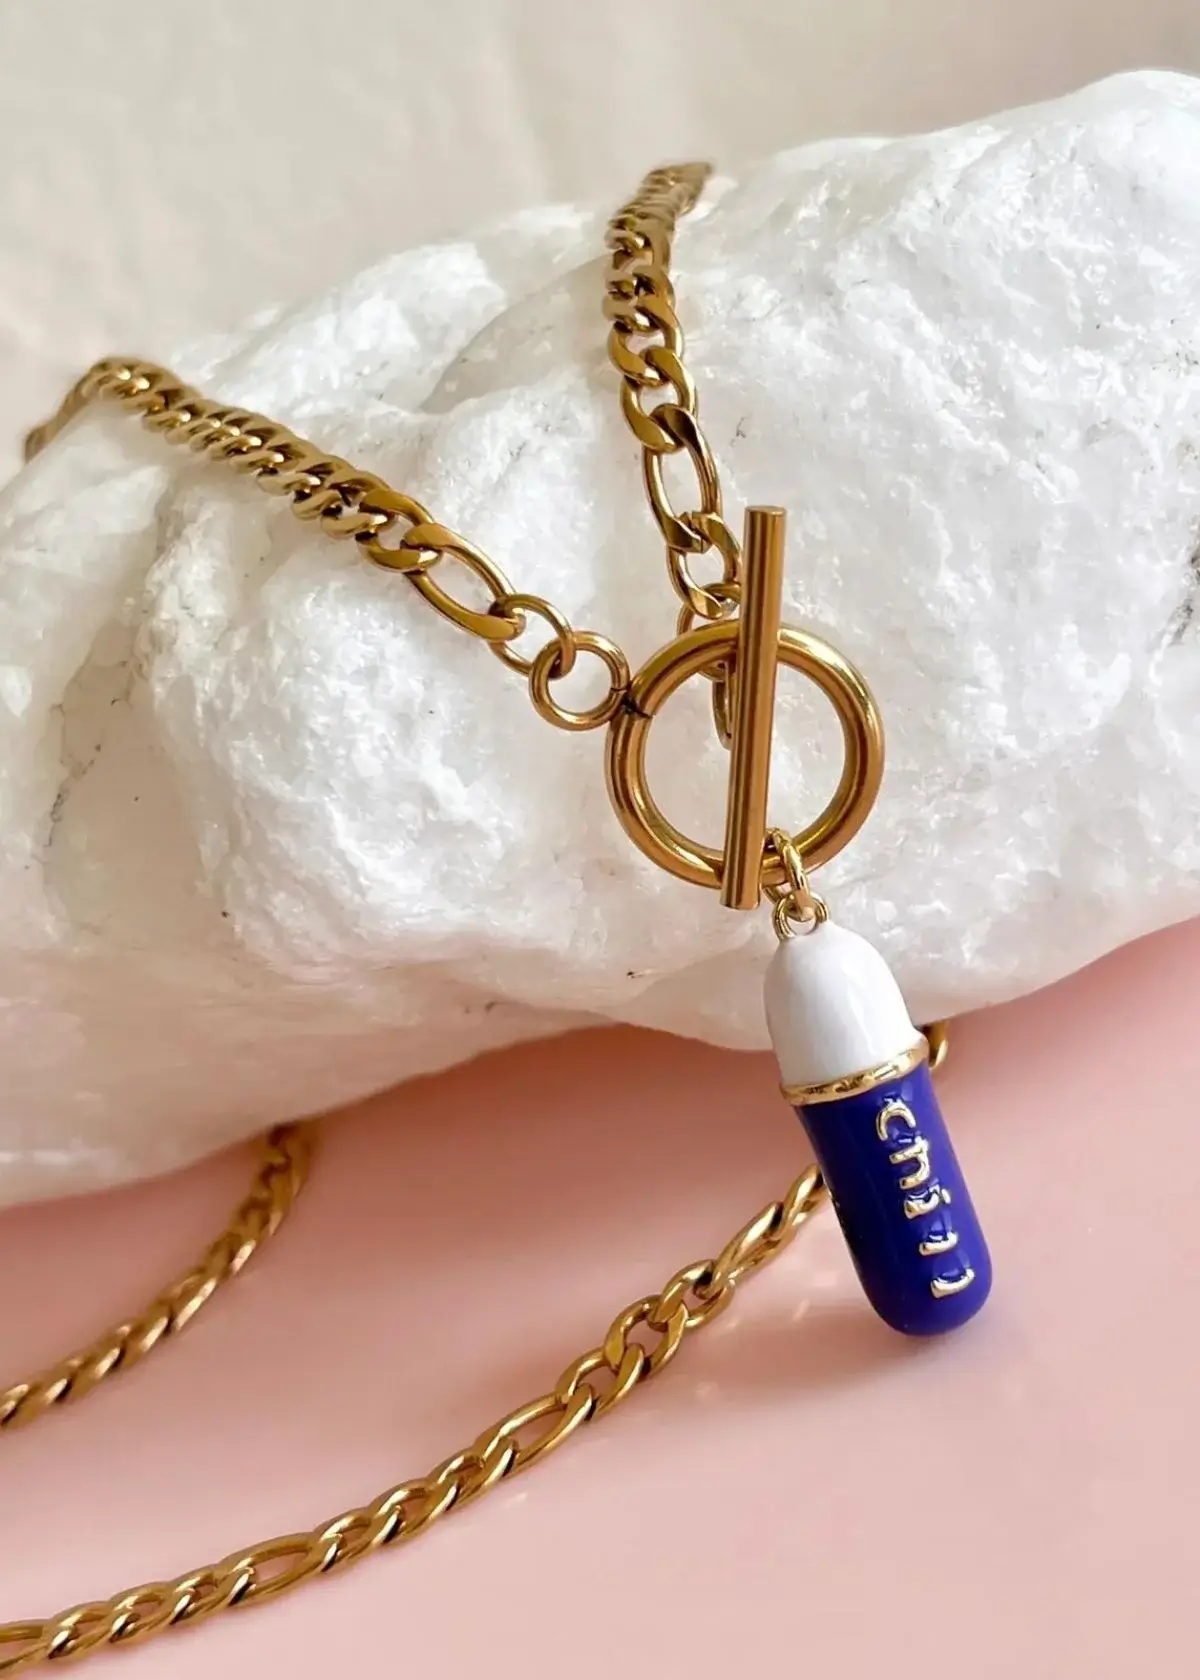 How to choose the right chill pill necklace?